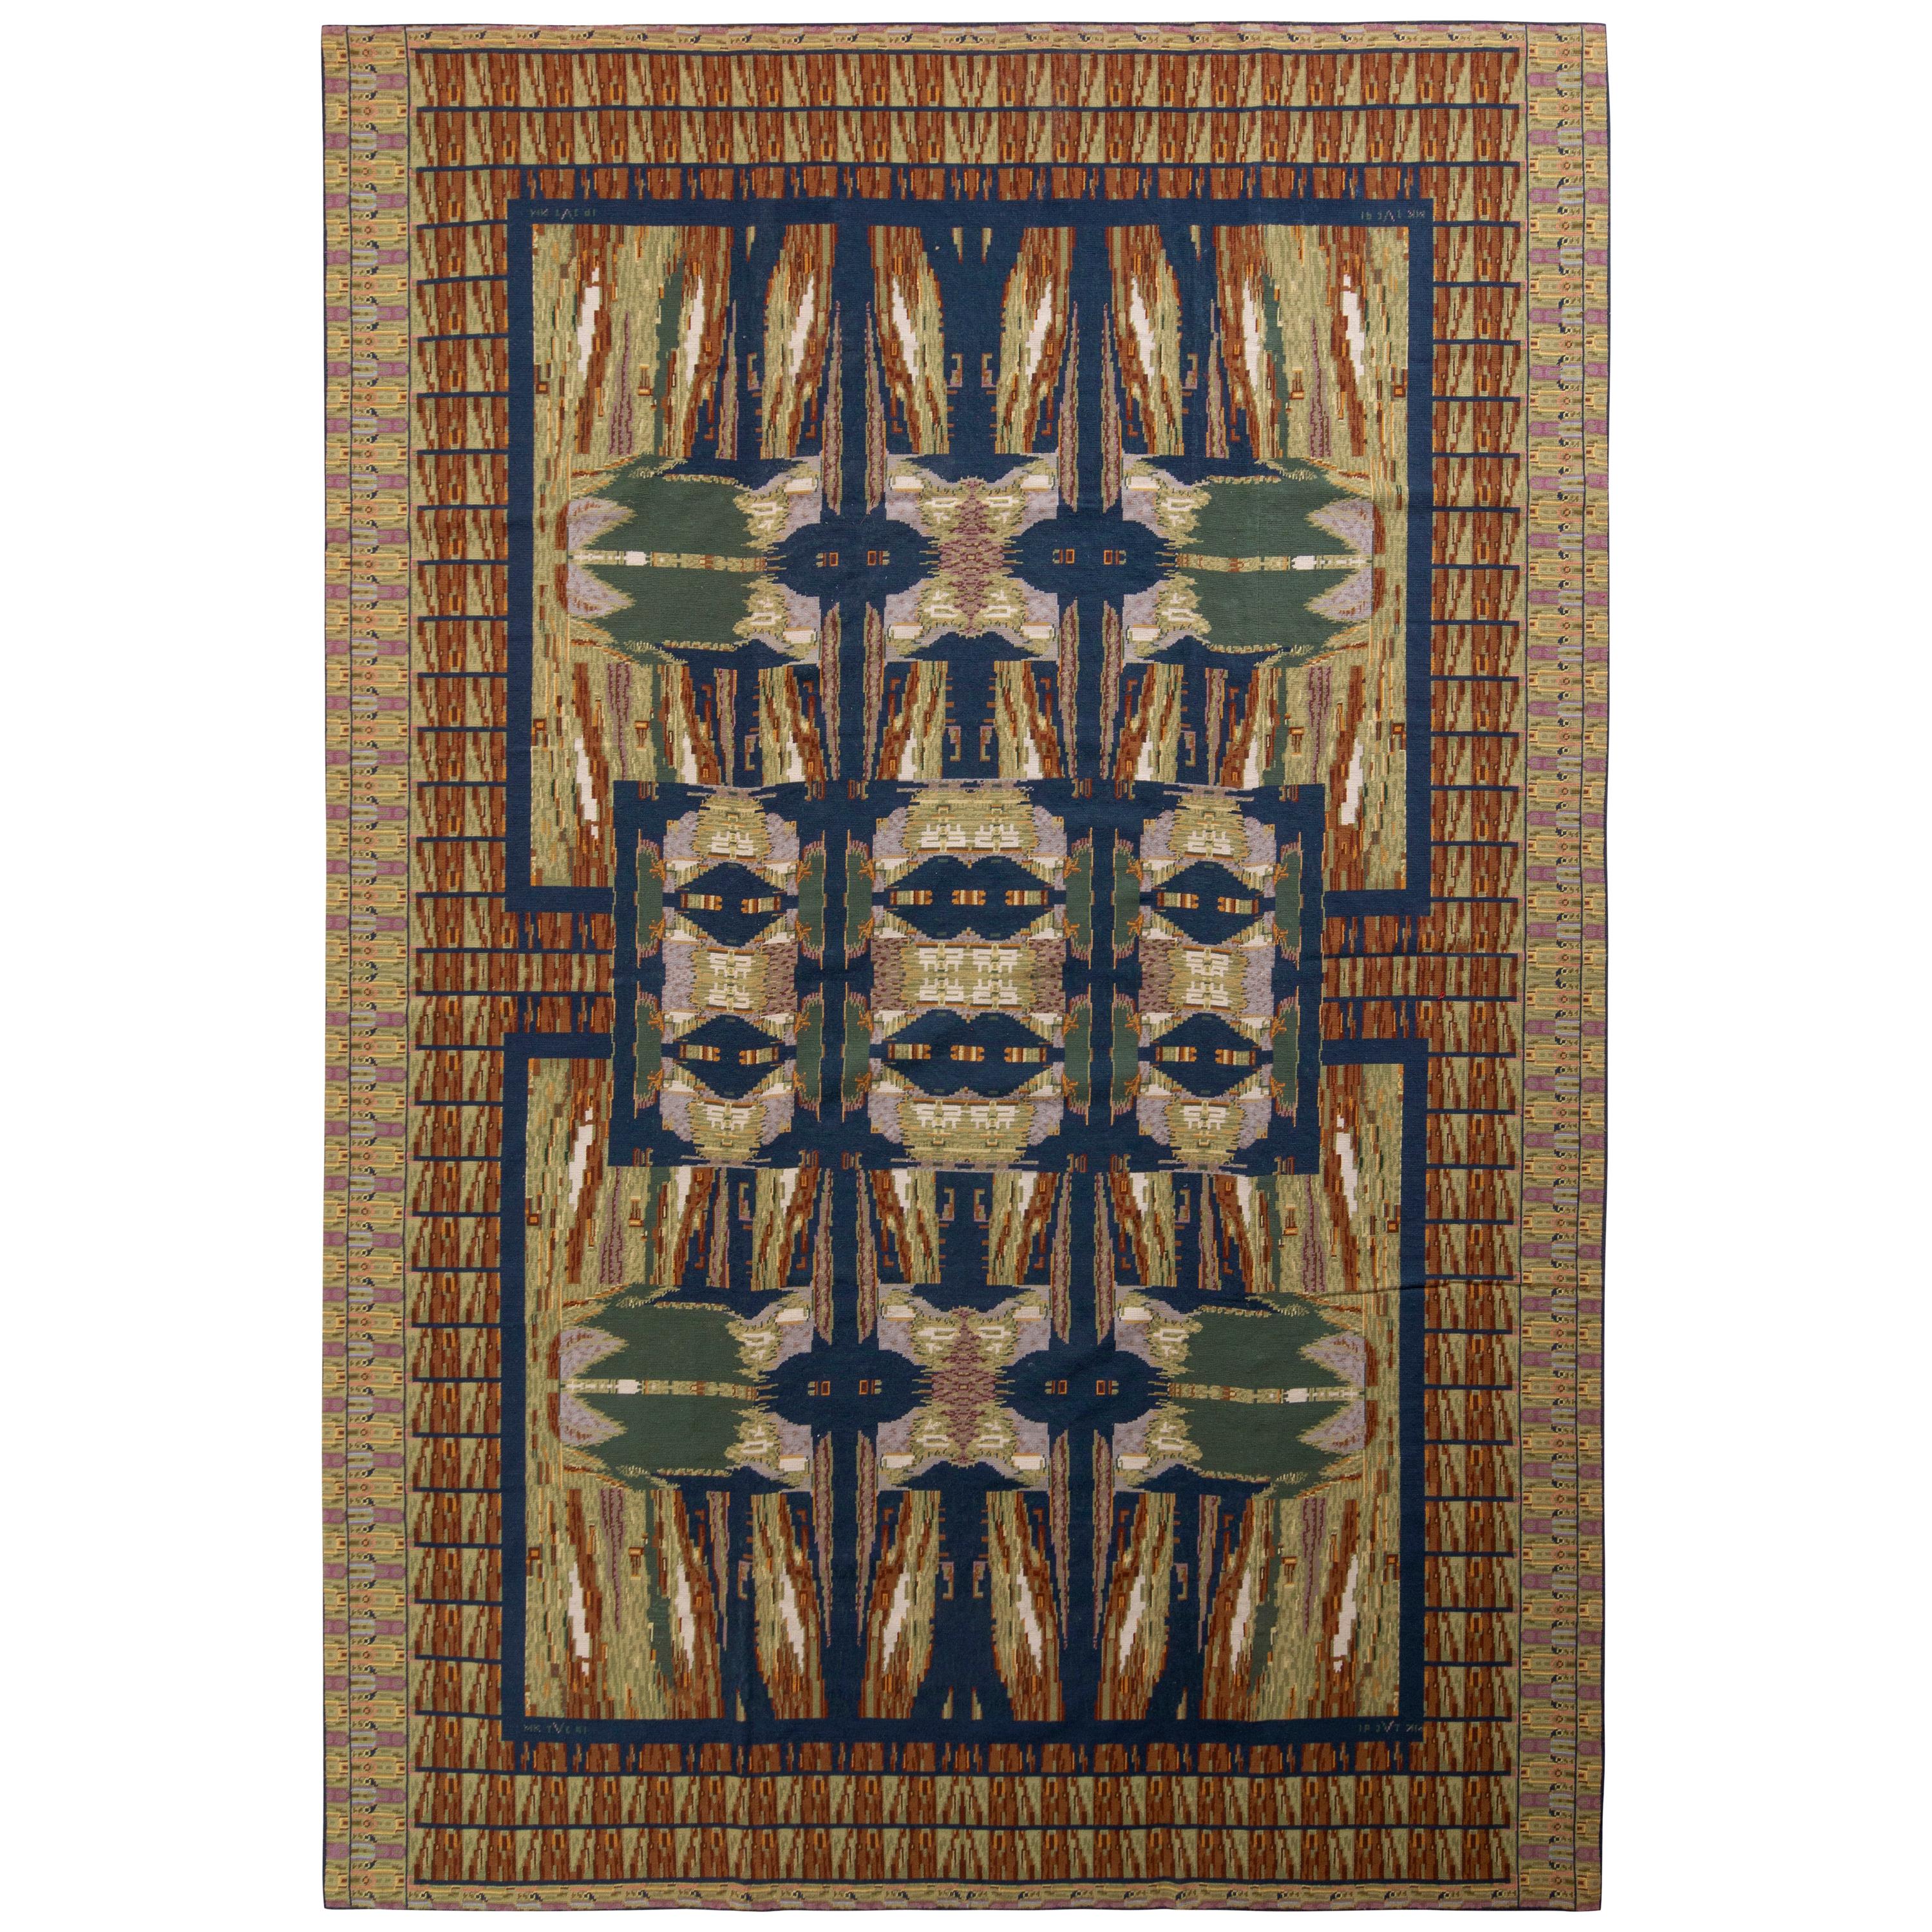 Handmade Contemporary Needlepoint Rug in Green and Beige Brown Geometric Pattern